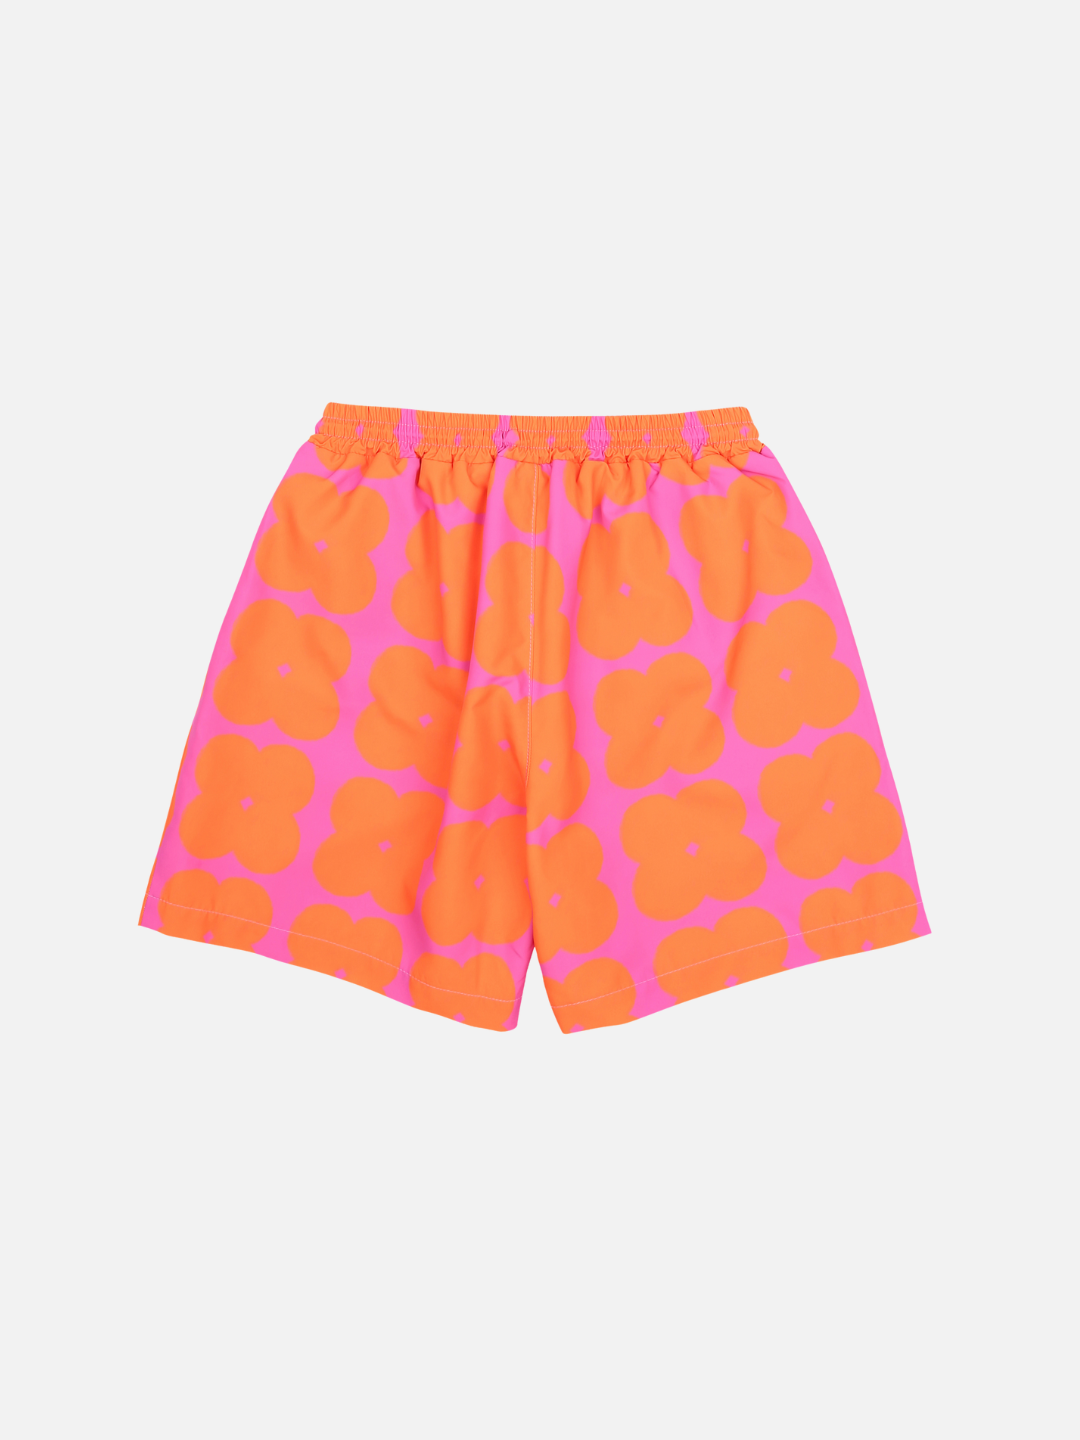 Back of Clover Shorts. Bright orange clover shapes on a bright pink background. Has an elastic waist with a tie and small logo on bottom right corner.